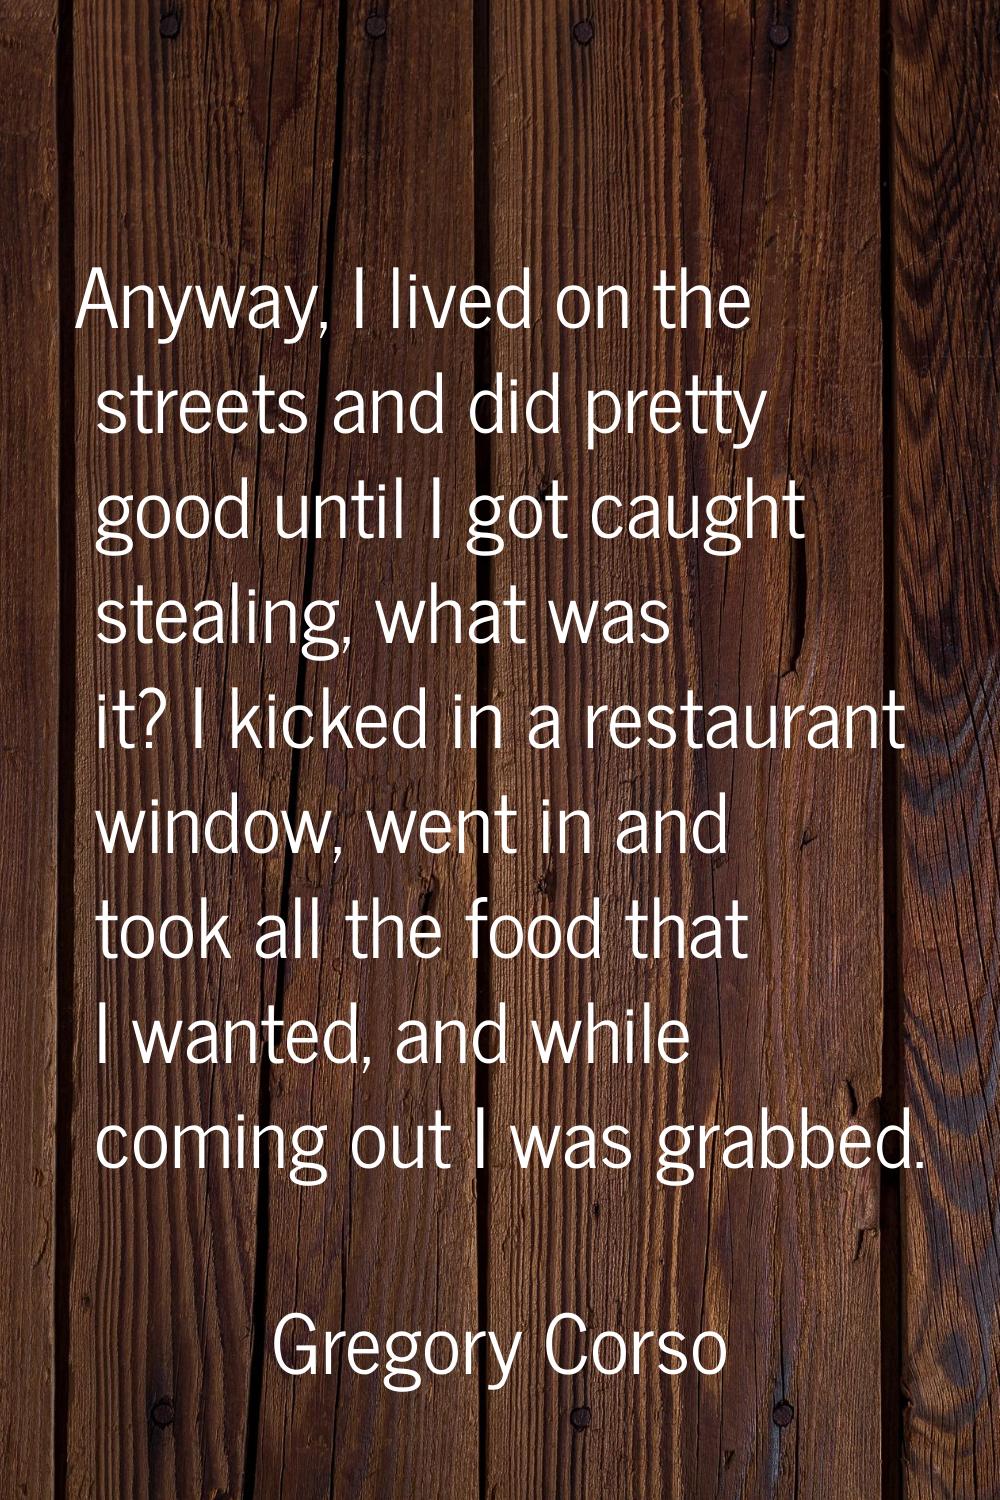 Anyway, I lived on the streets and did pretty good until I got caught stealing, what was it? I kick